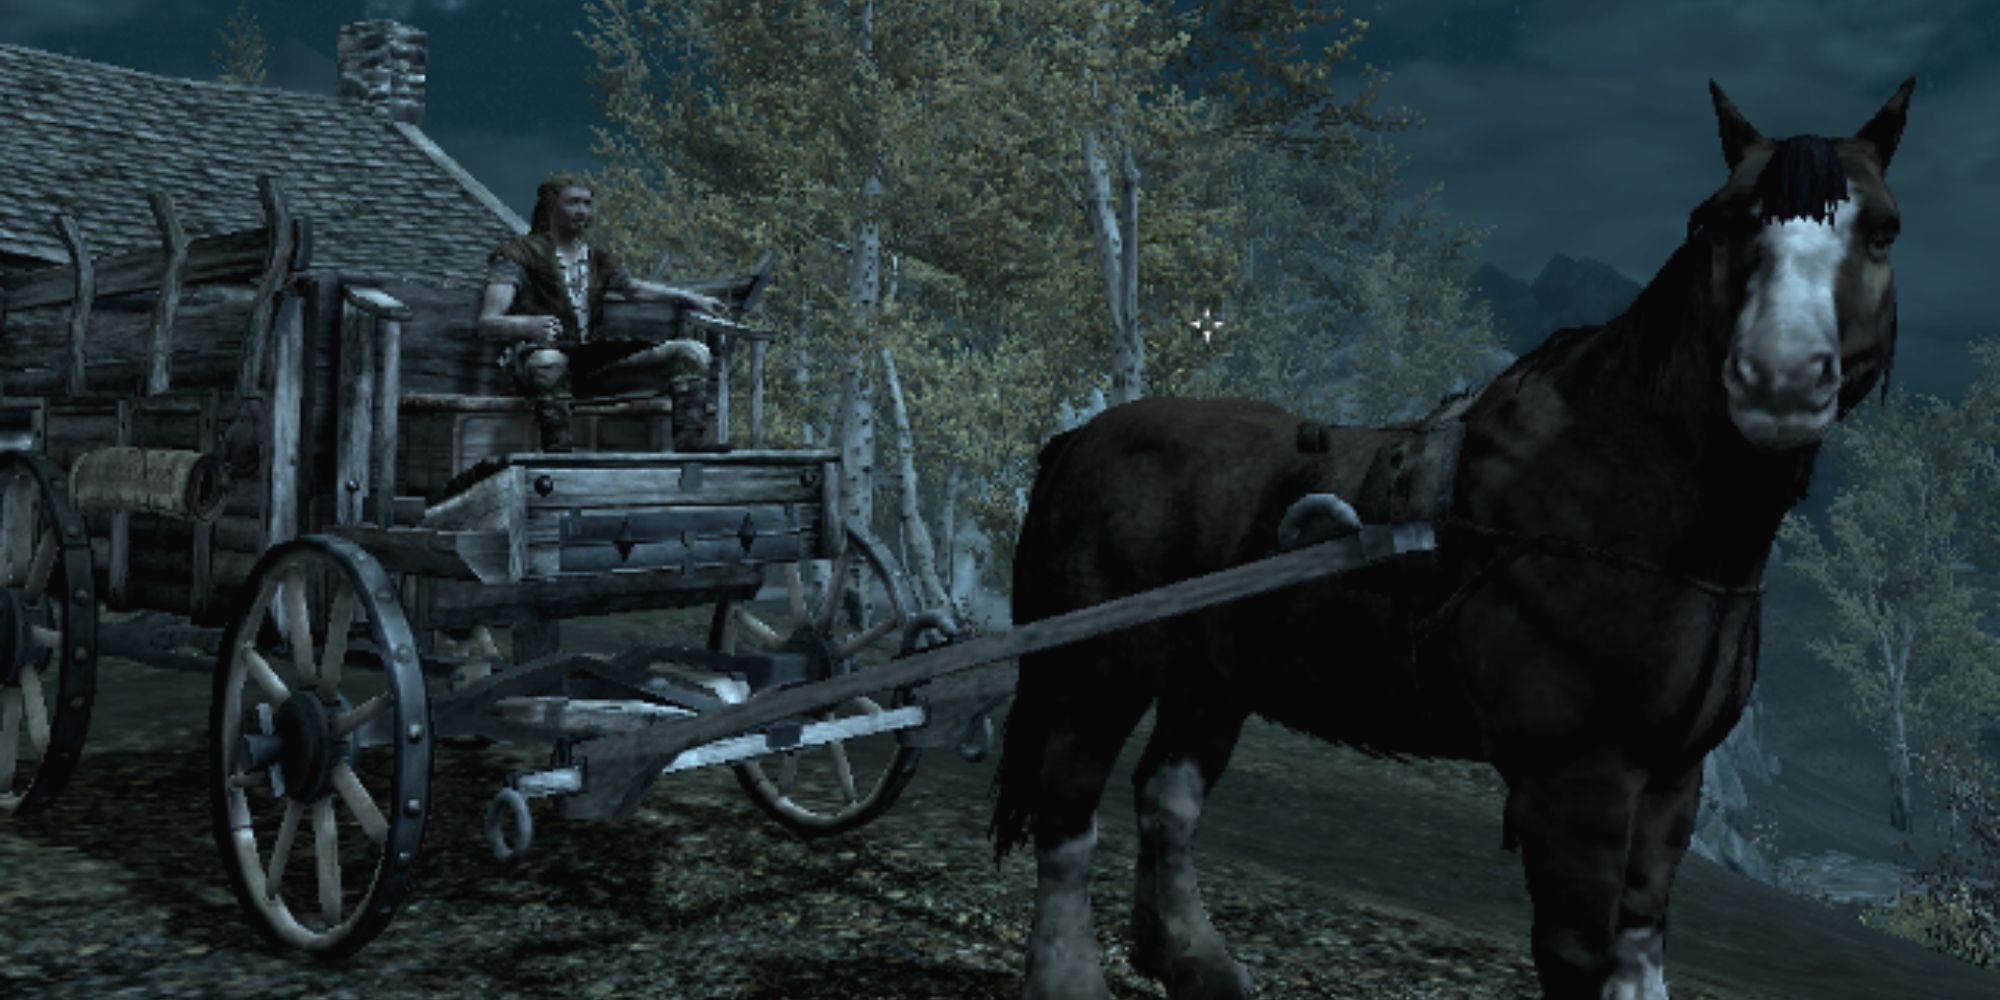 Fast Travel In Video Games a wide shot of a man on a wooden horse-drawn carriage in Skyrim set at night with trees and a roof in the background